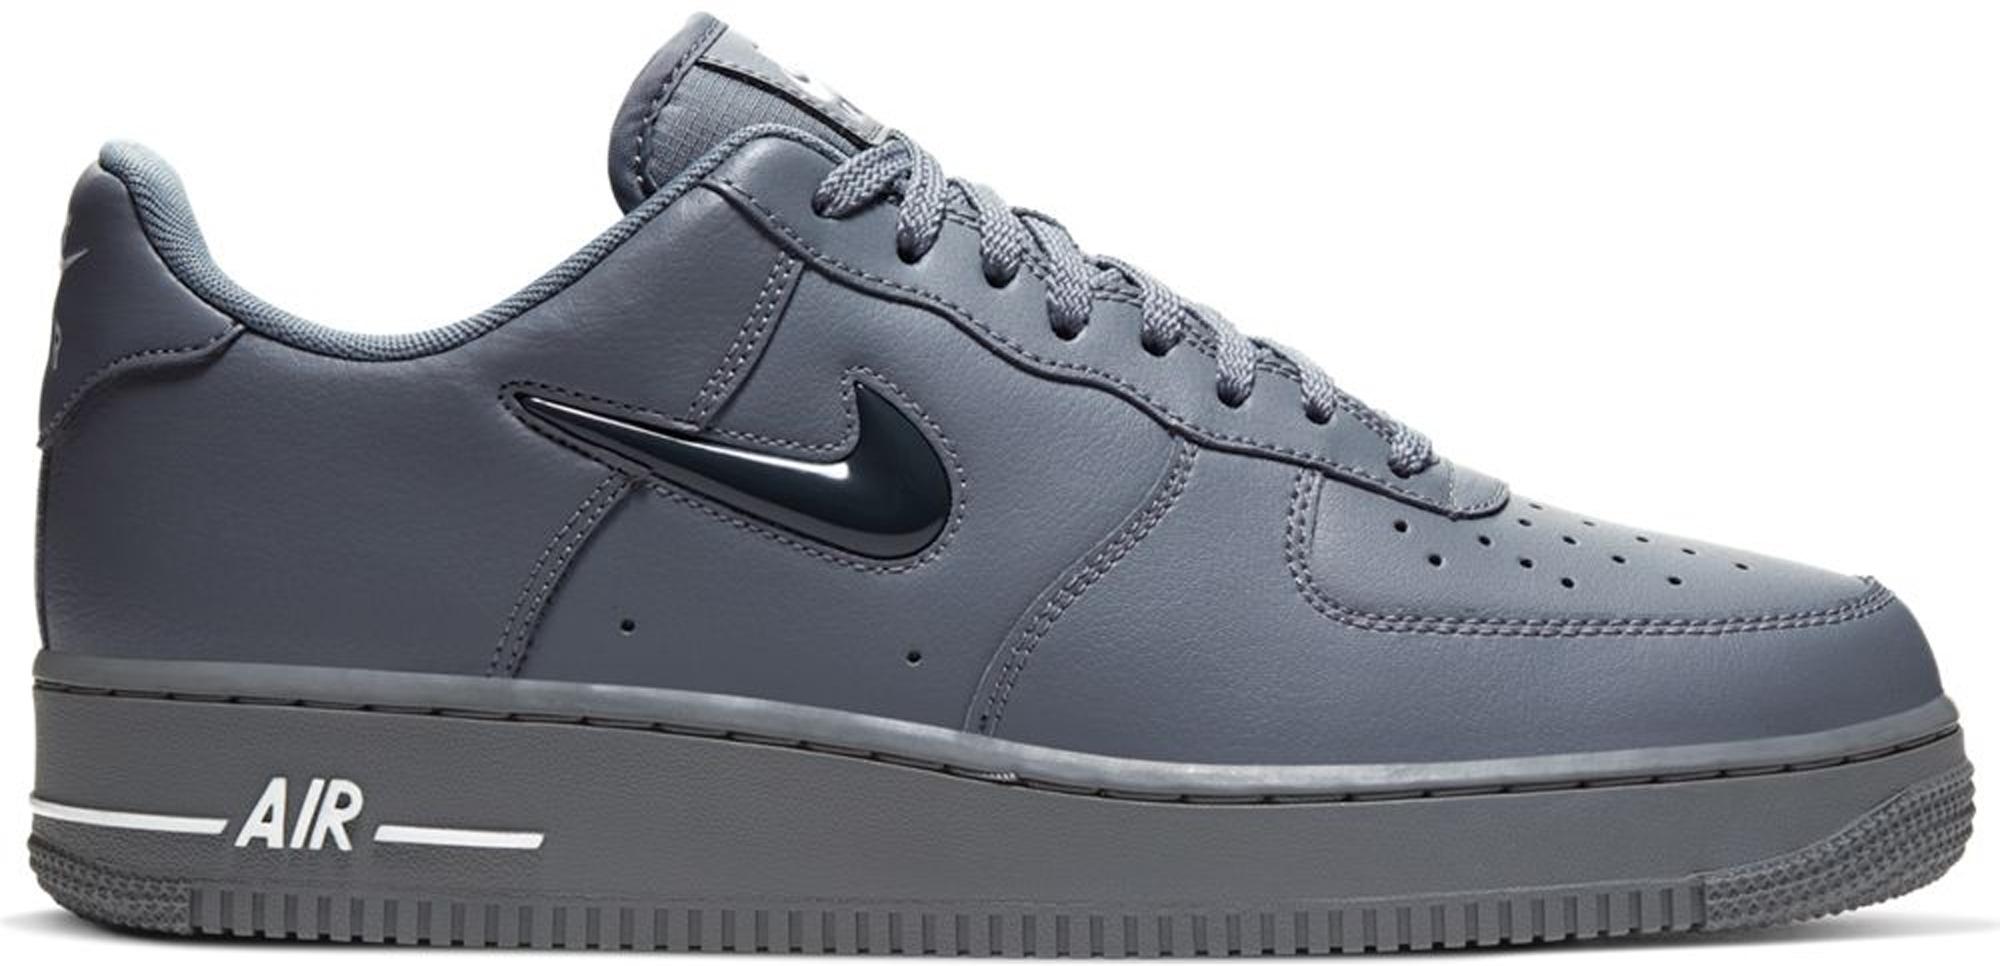 Nike Air Force 1 Low Jewel Wolf Grey Black in Grey for Men - Lyst